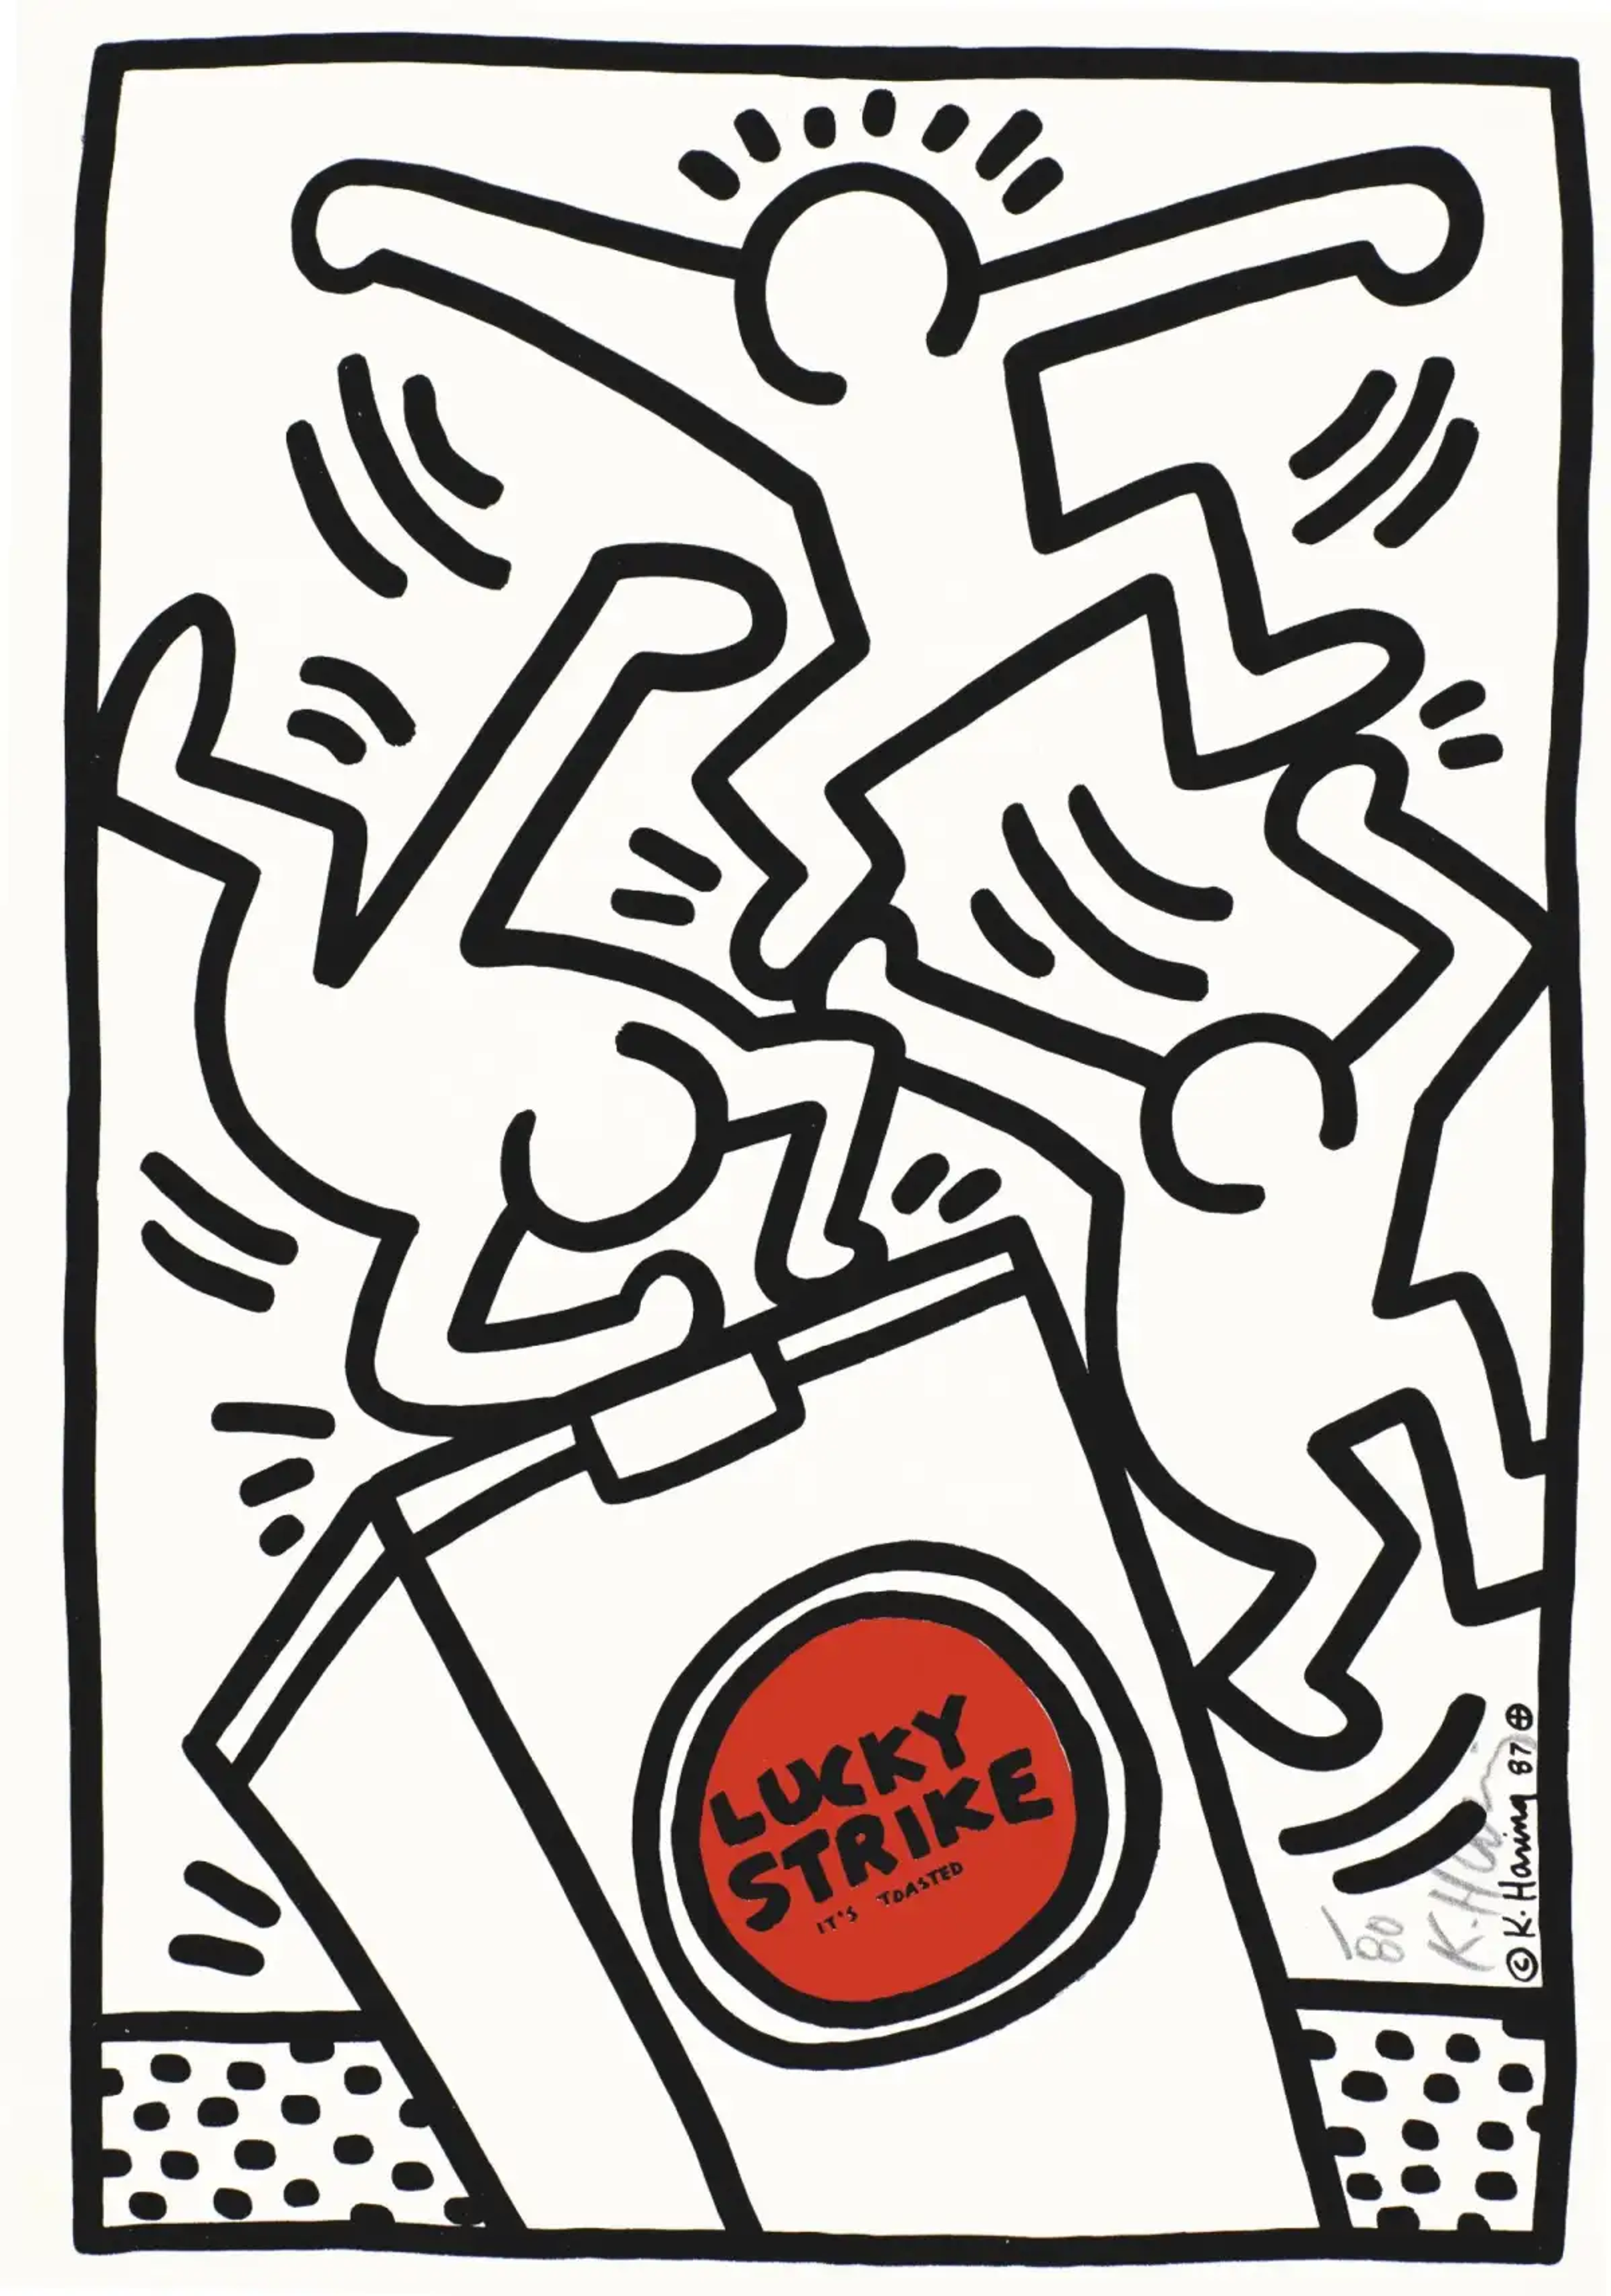 hows three jumping and dancing figures that surround the box of Lucky Strike cigarettes in dynamic composition. The composition is mostly in black and white, with only the Lucky Strike logo in colour.